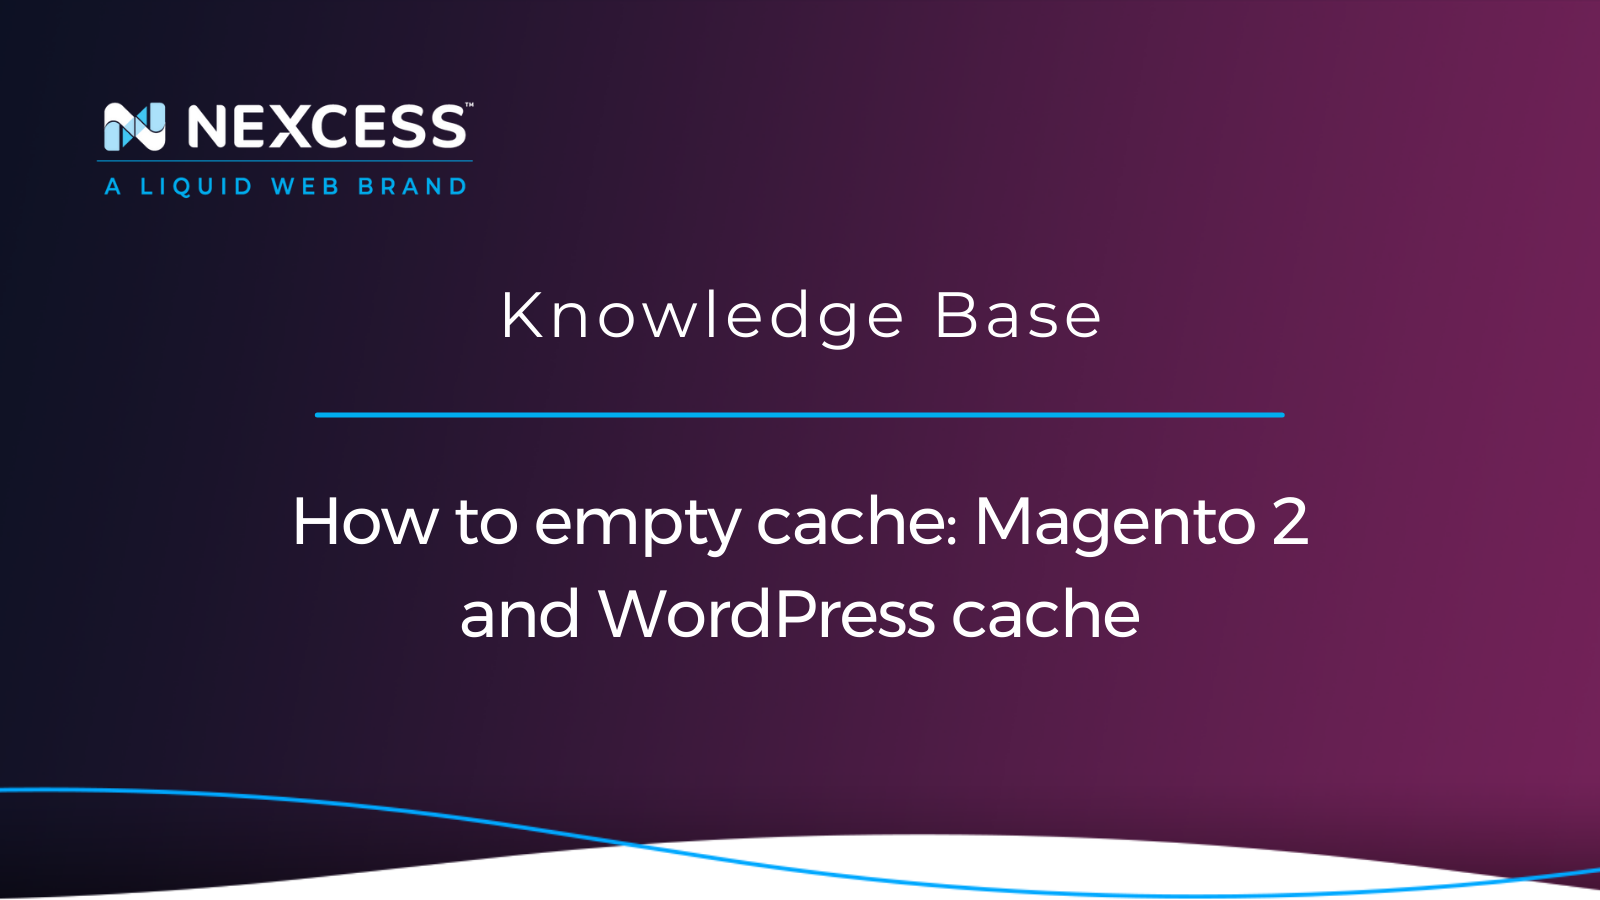 How to empty cache: Magento 2 and WordPress cache